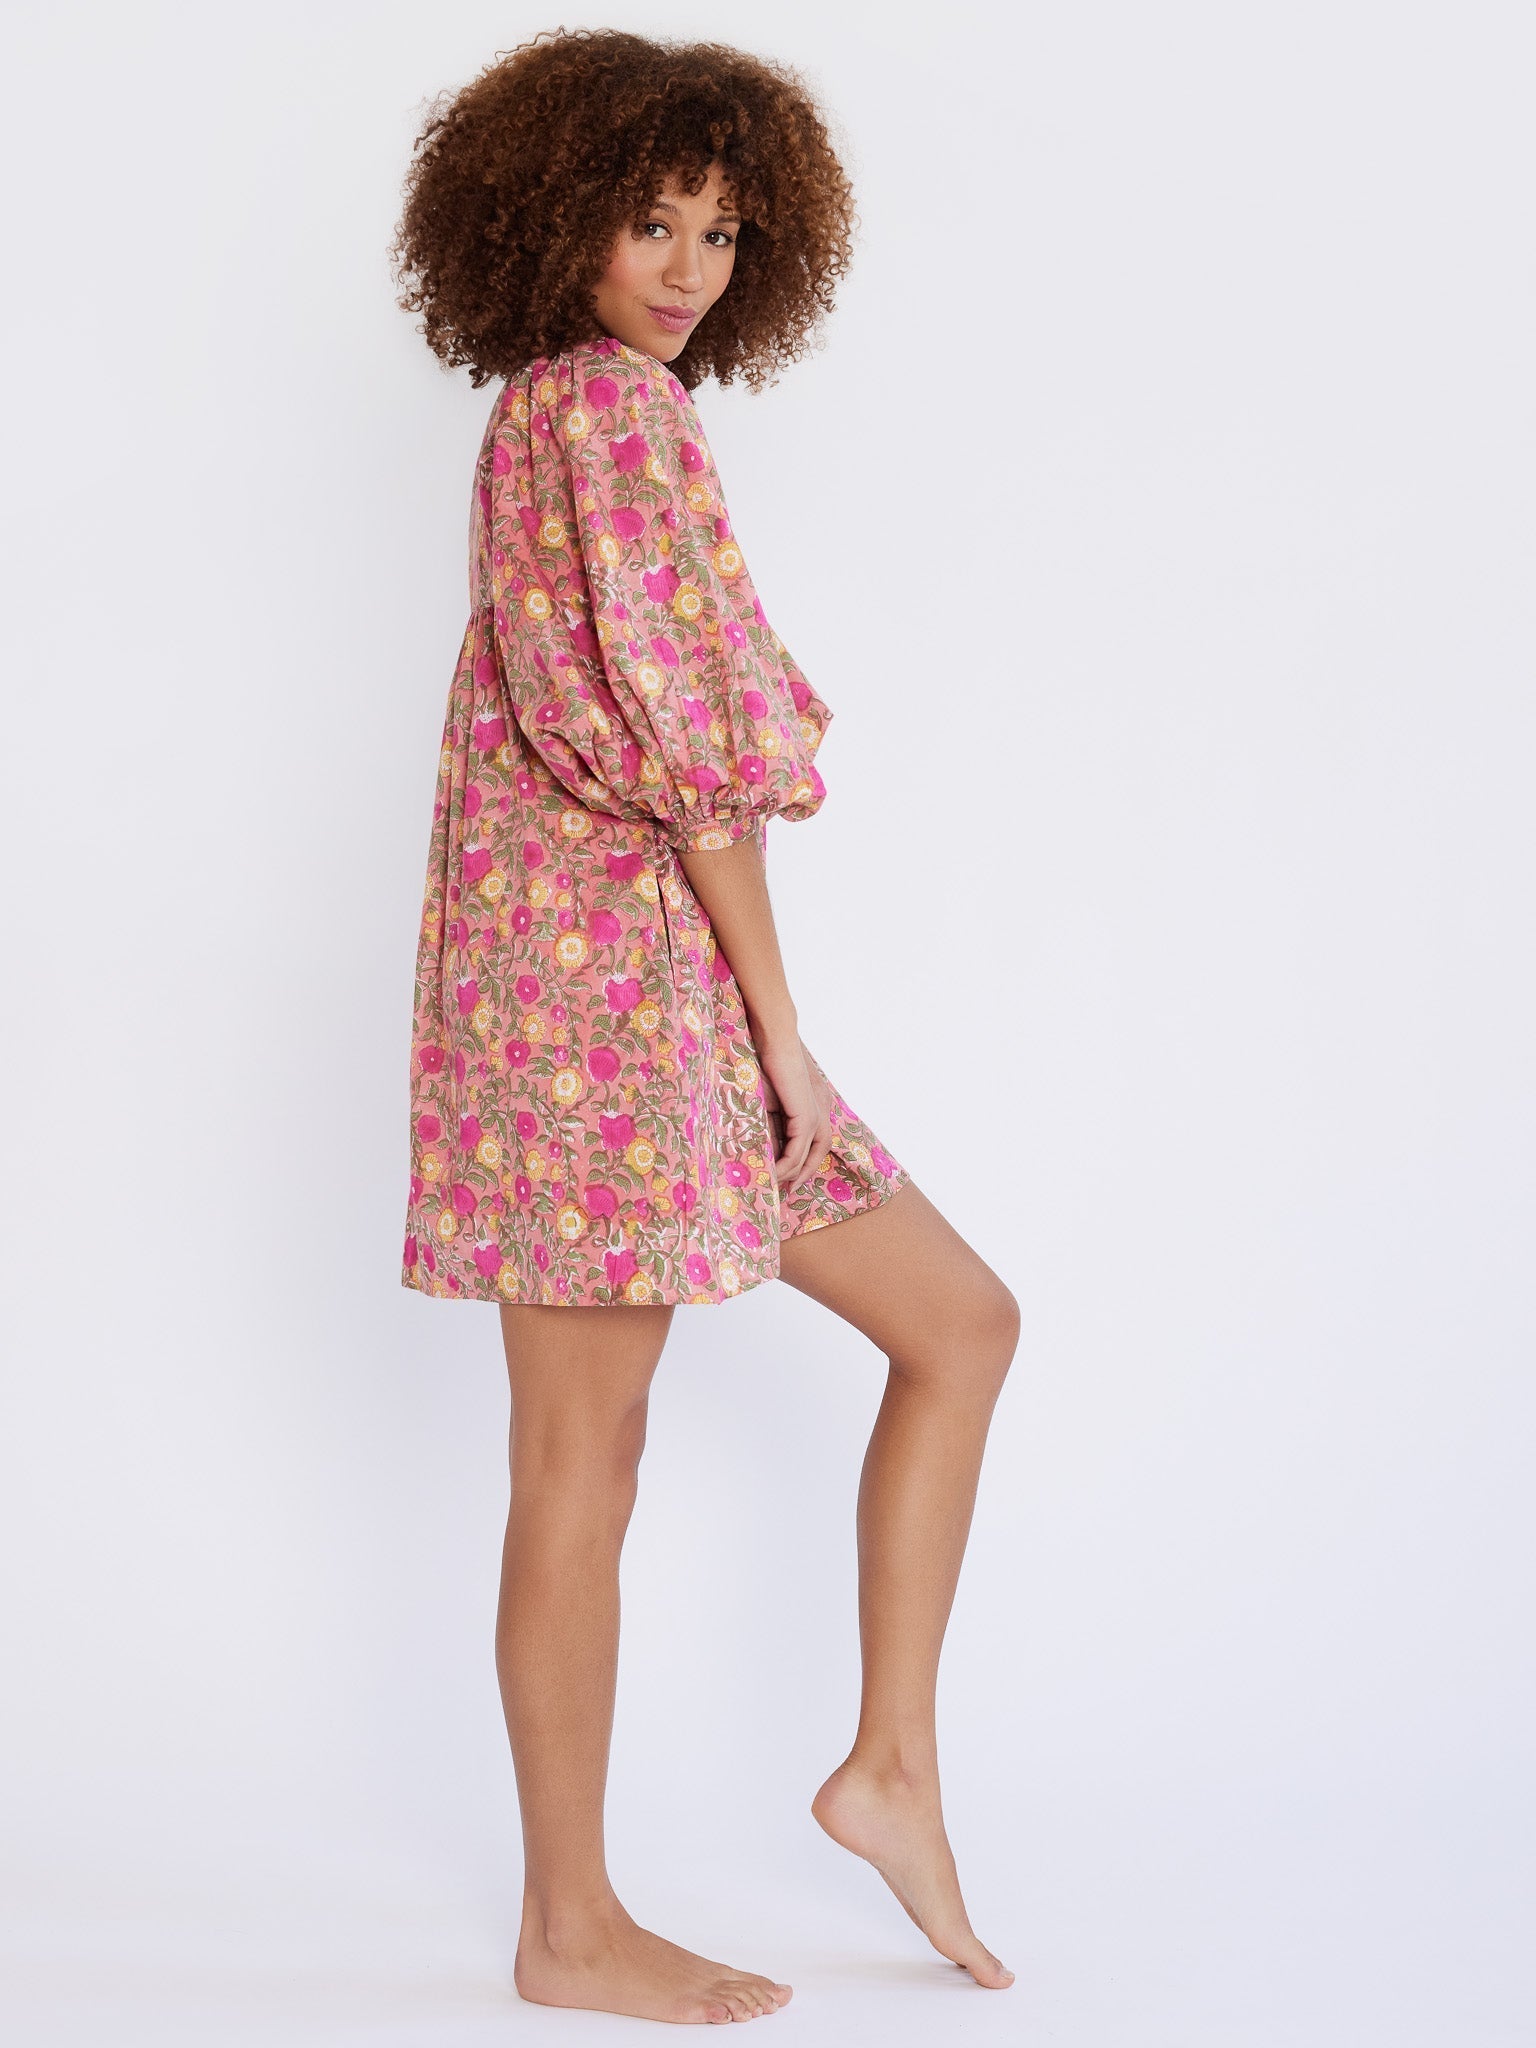 MILLE Clothing Daisy Dress in Passionfruit